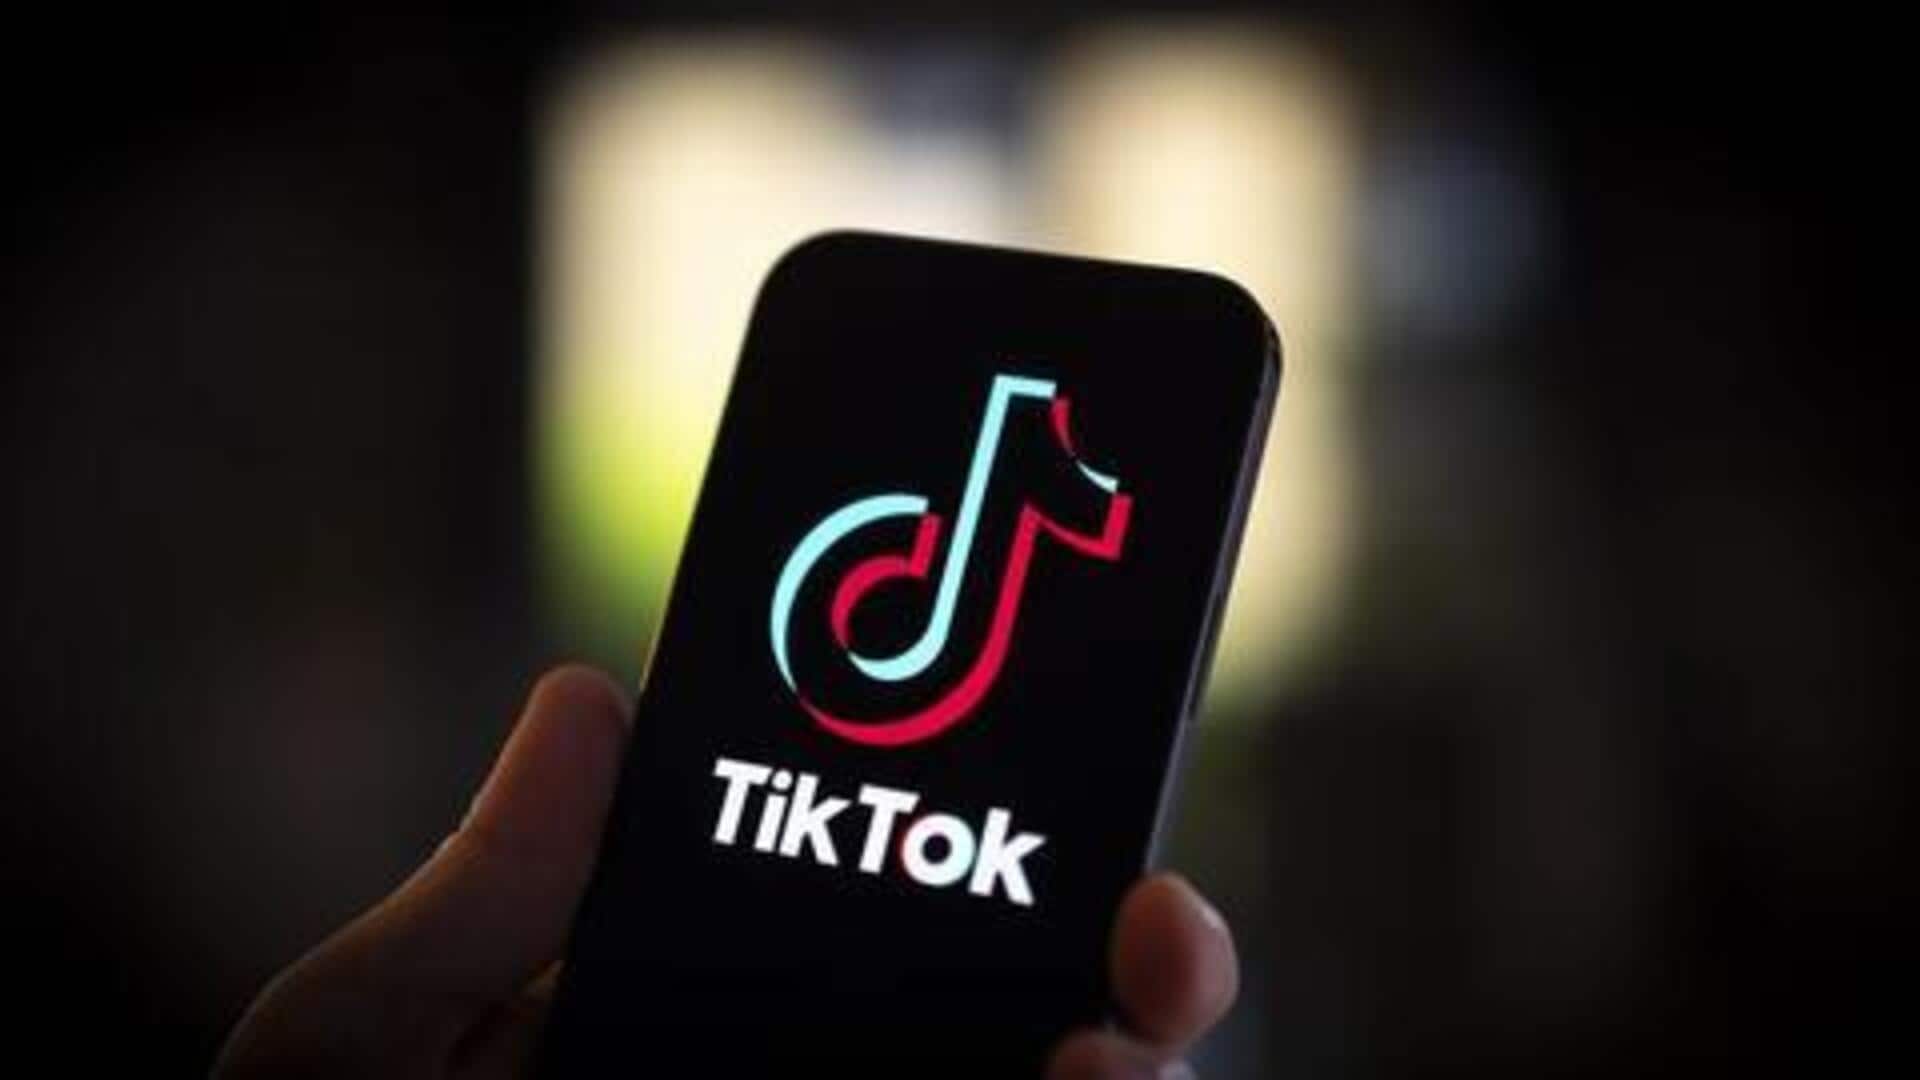 TikTok counters content criticism with STEM feed launch in Europe